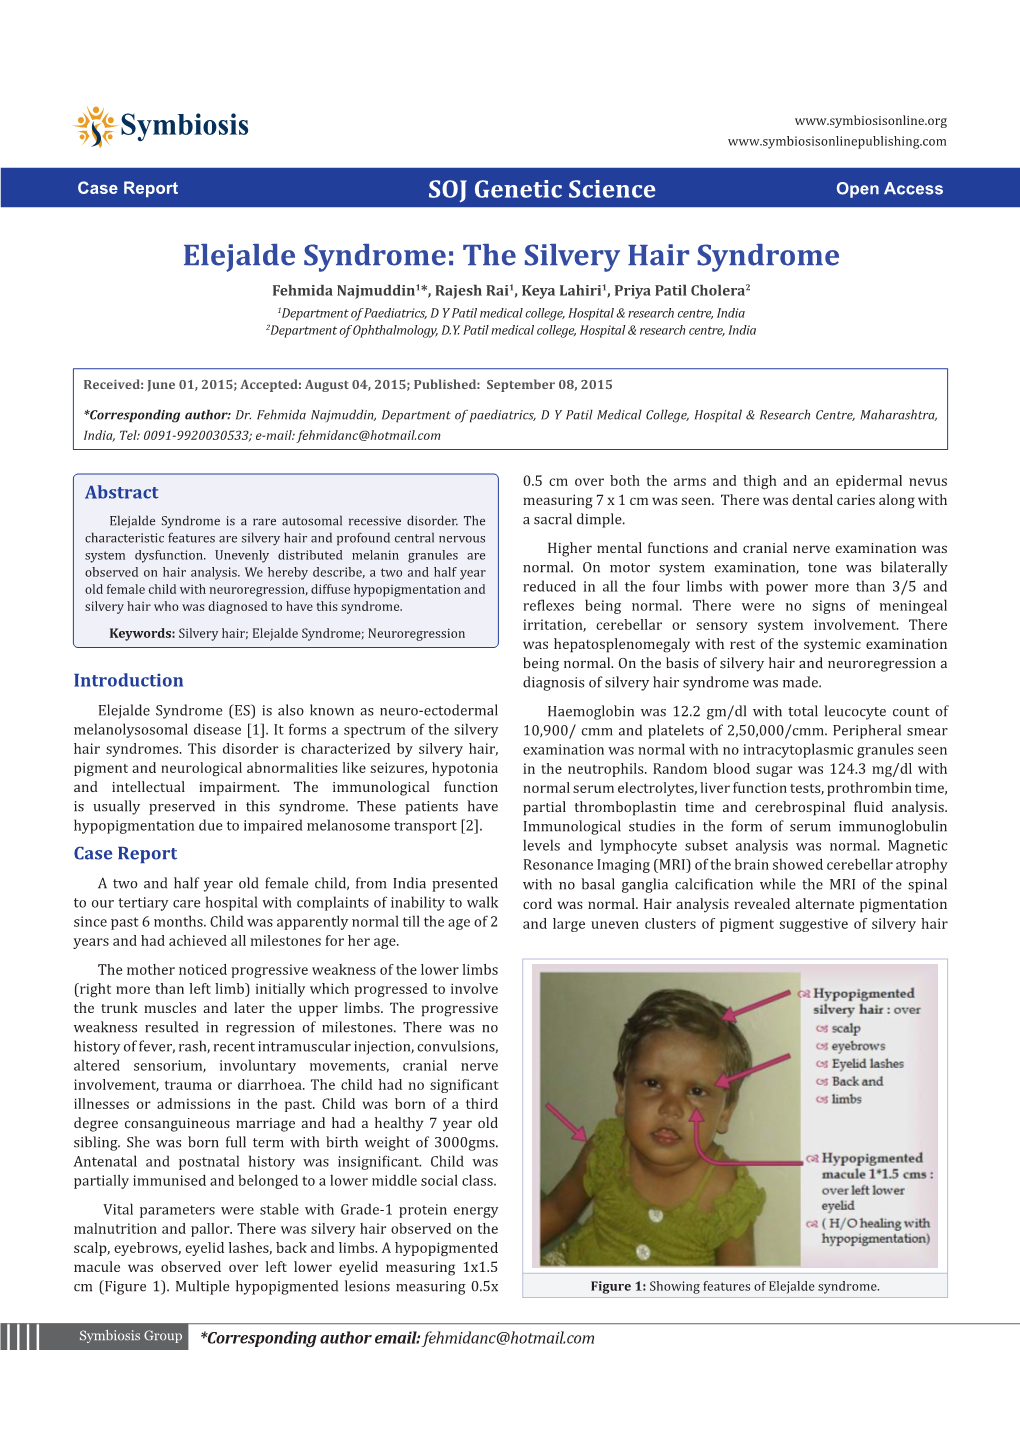 The Silvery Hair Syndrome